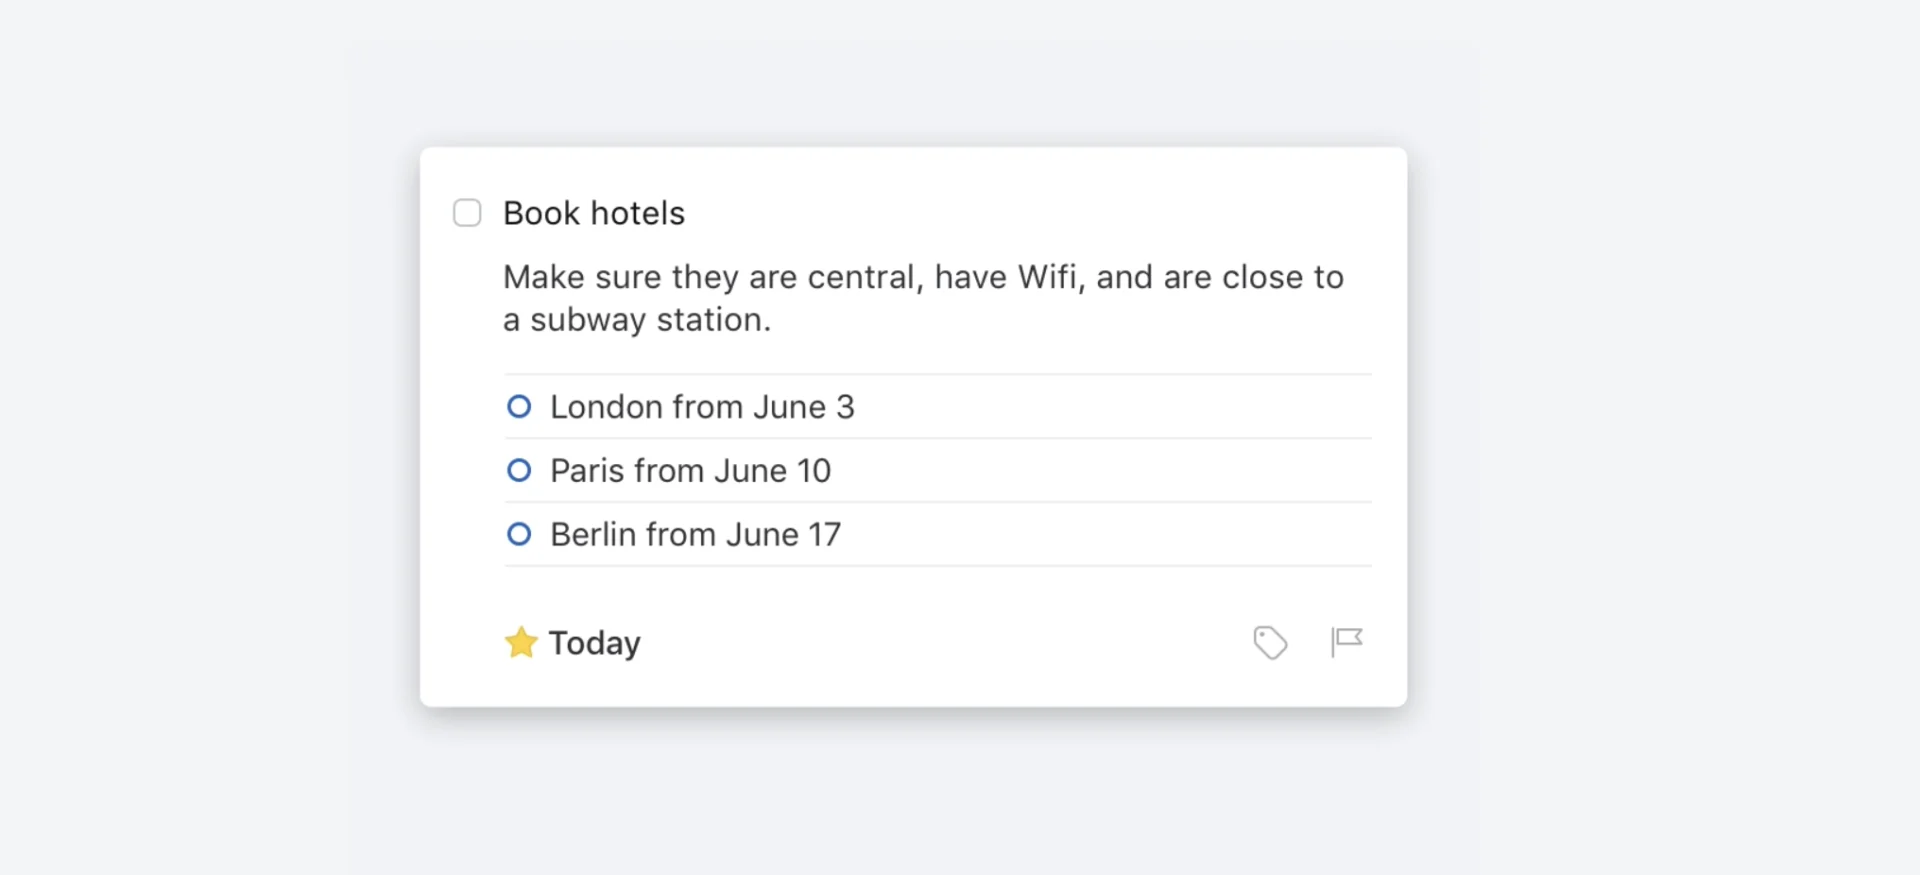 Things 3, Card, Shows Task of Book Hotels, with 3 Locations and dates for today